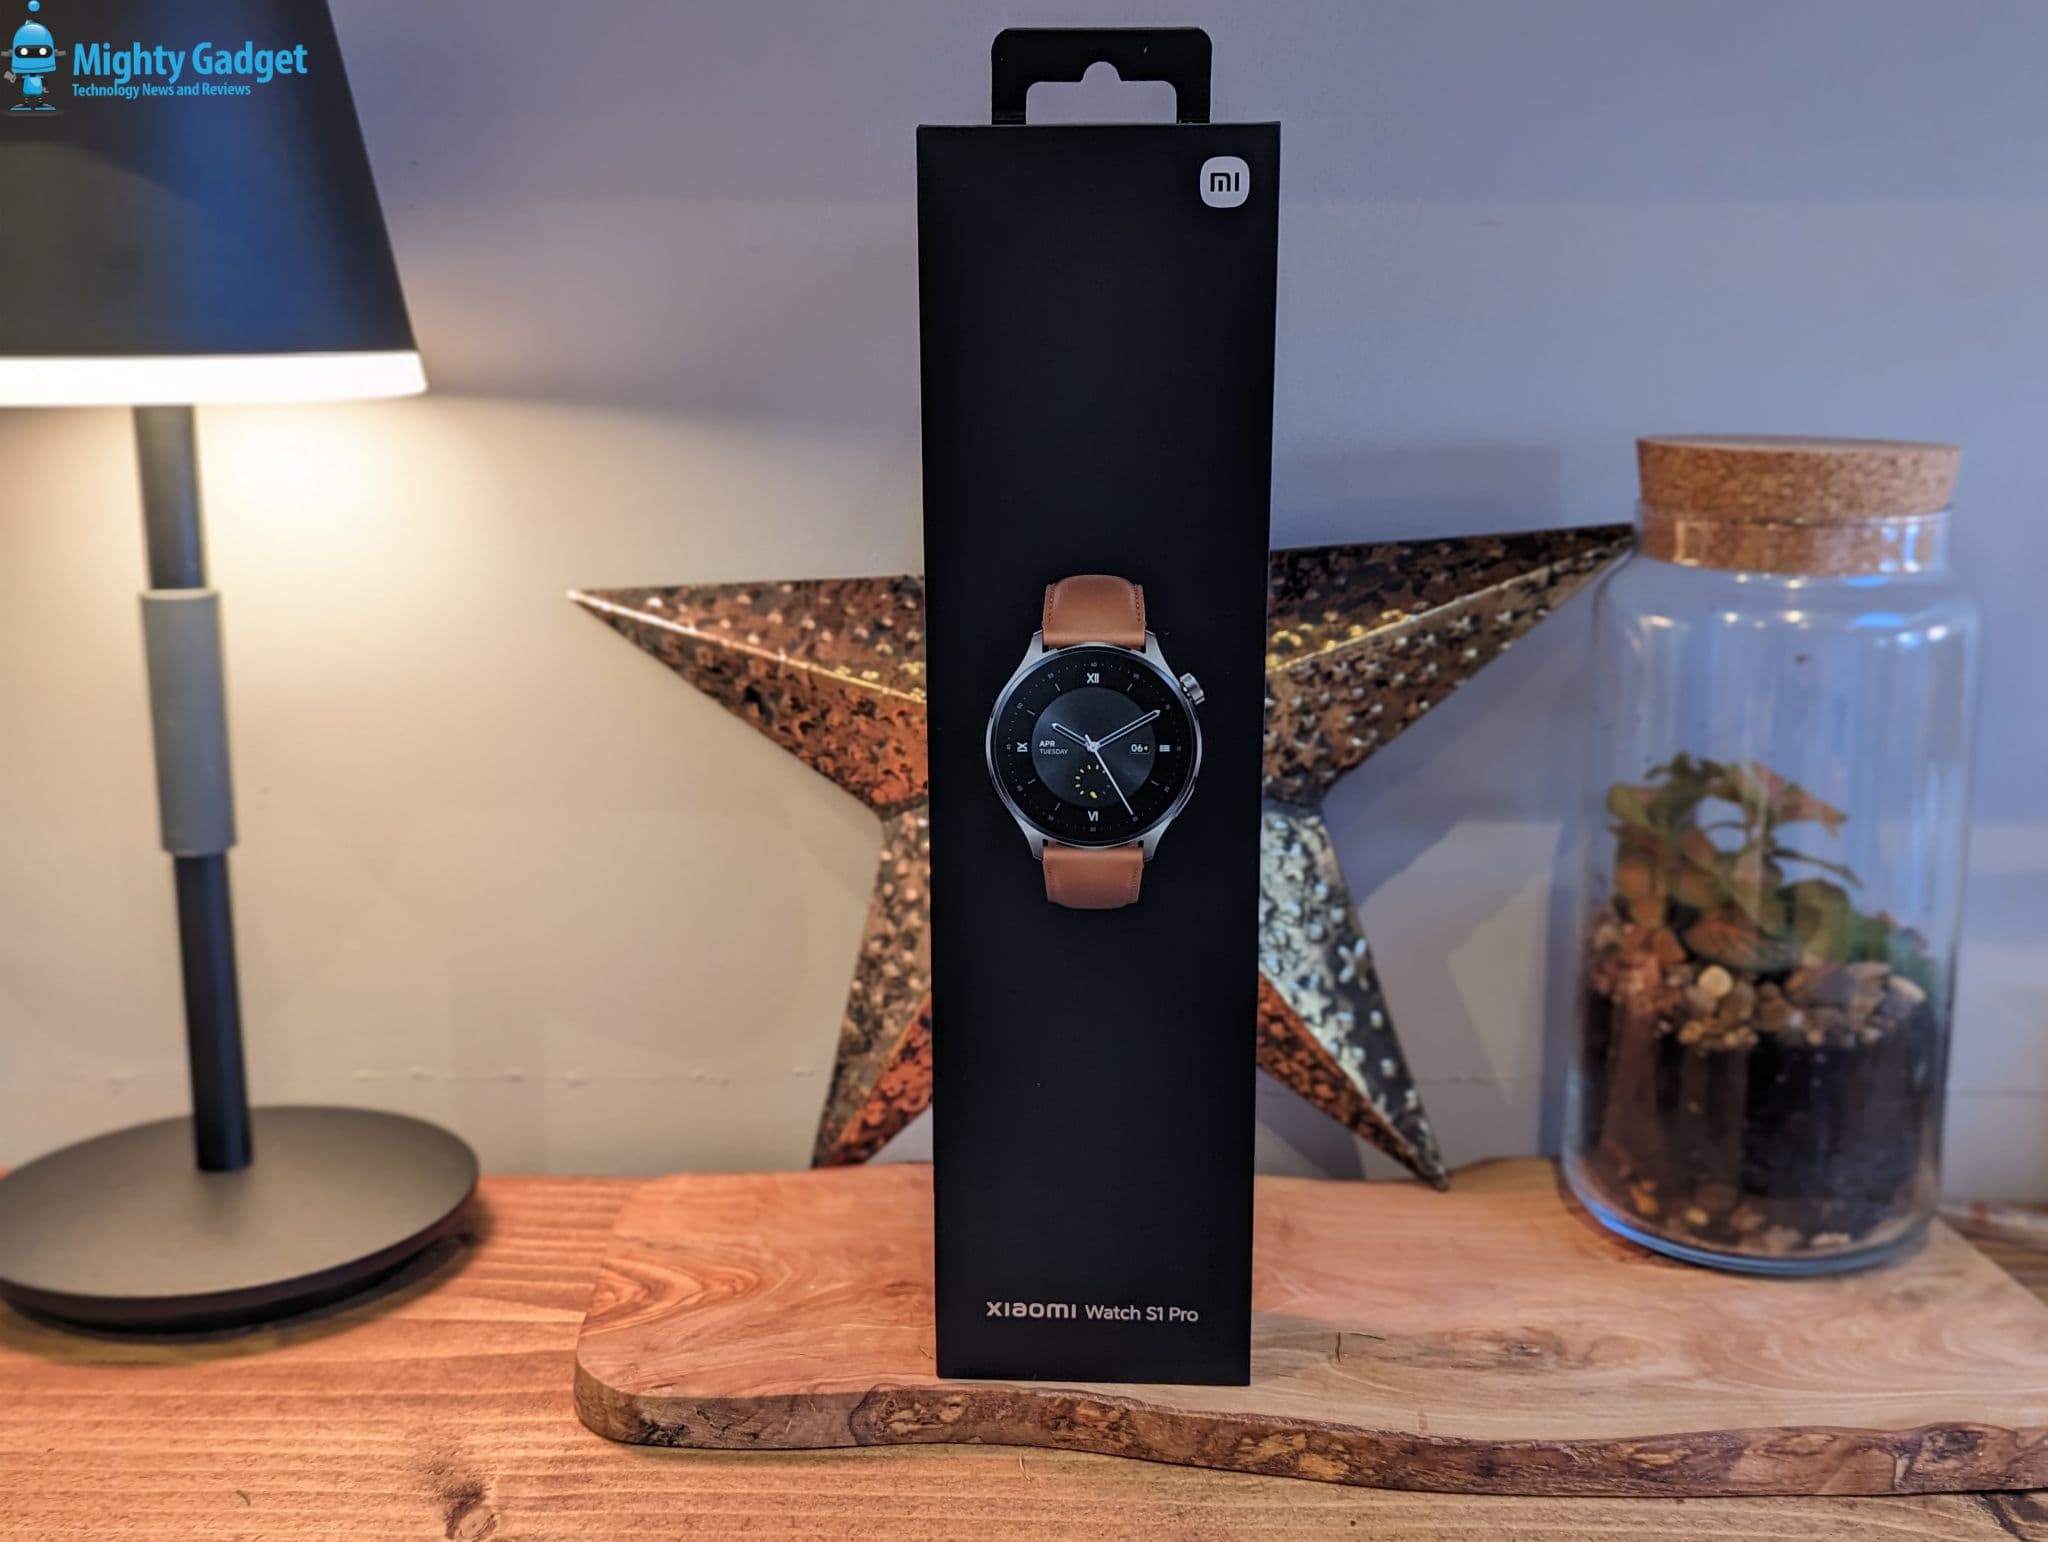 Xiaomi Watch S1 Pro Initial Impression Review – A premium construction to compete vs Huawei Watch GT 3 Pro